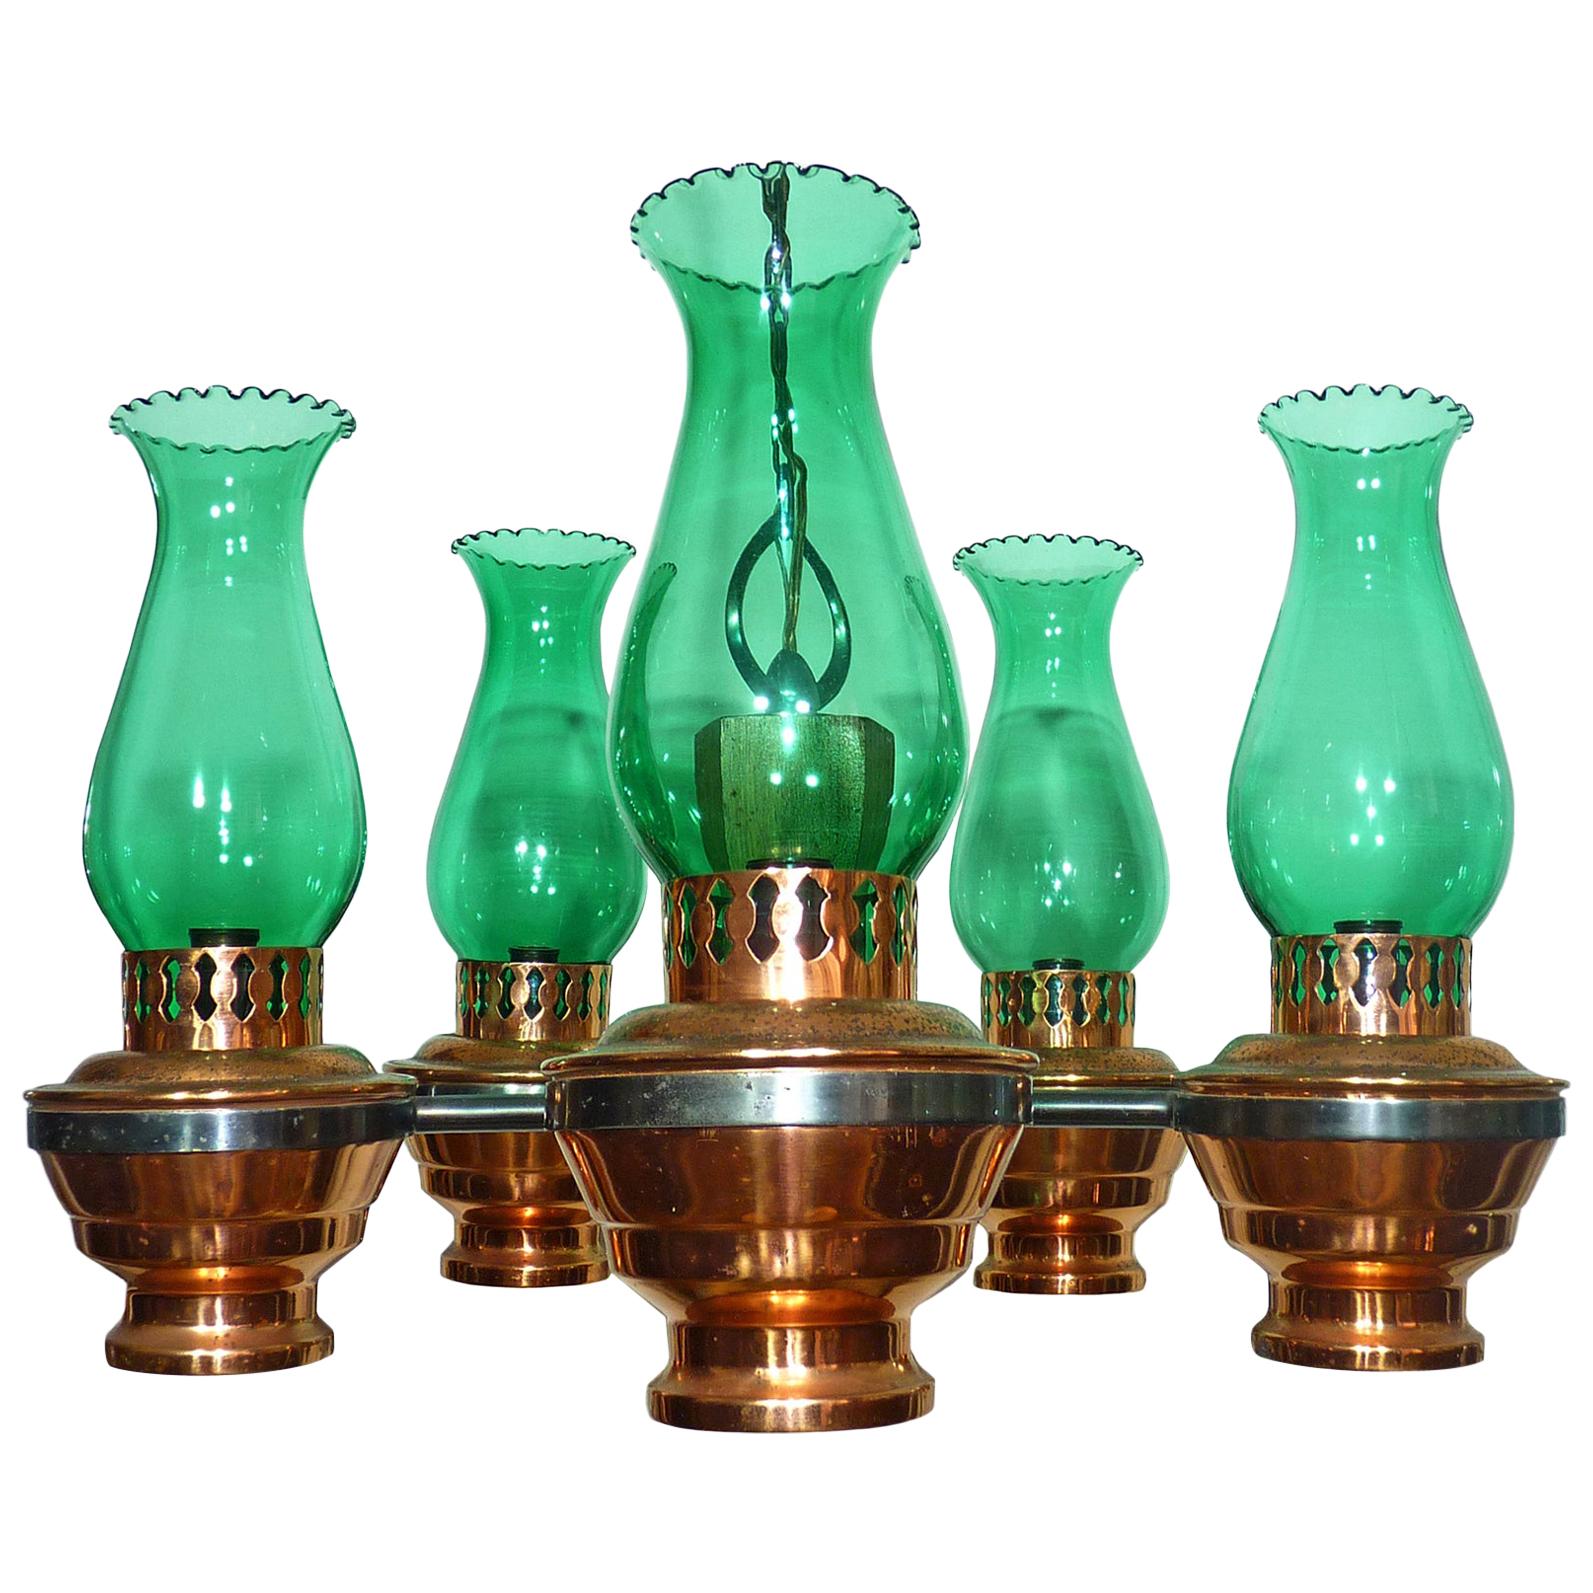 Colonial French Country Copper and Wood Chandelier Oil Lamp w Green Glass Shades